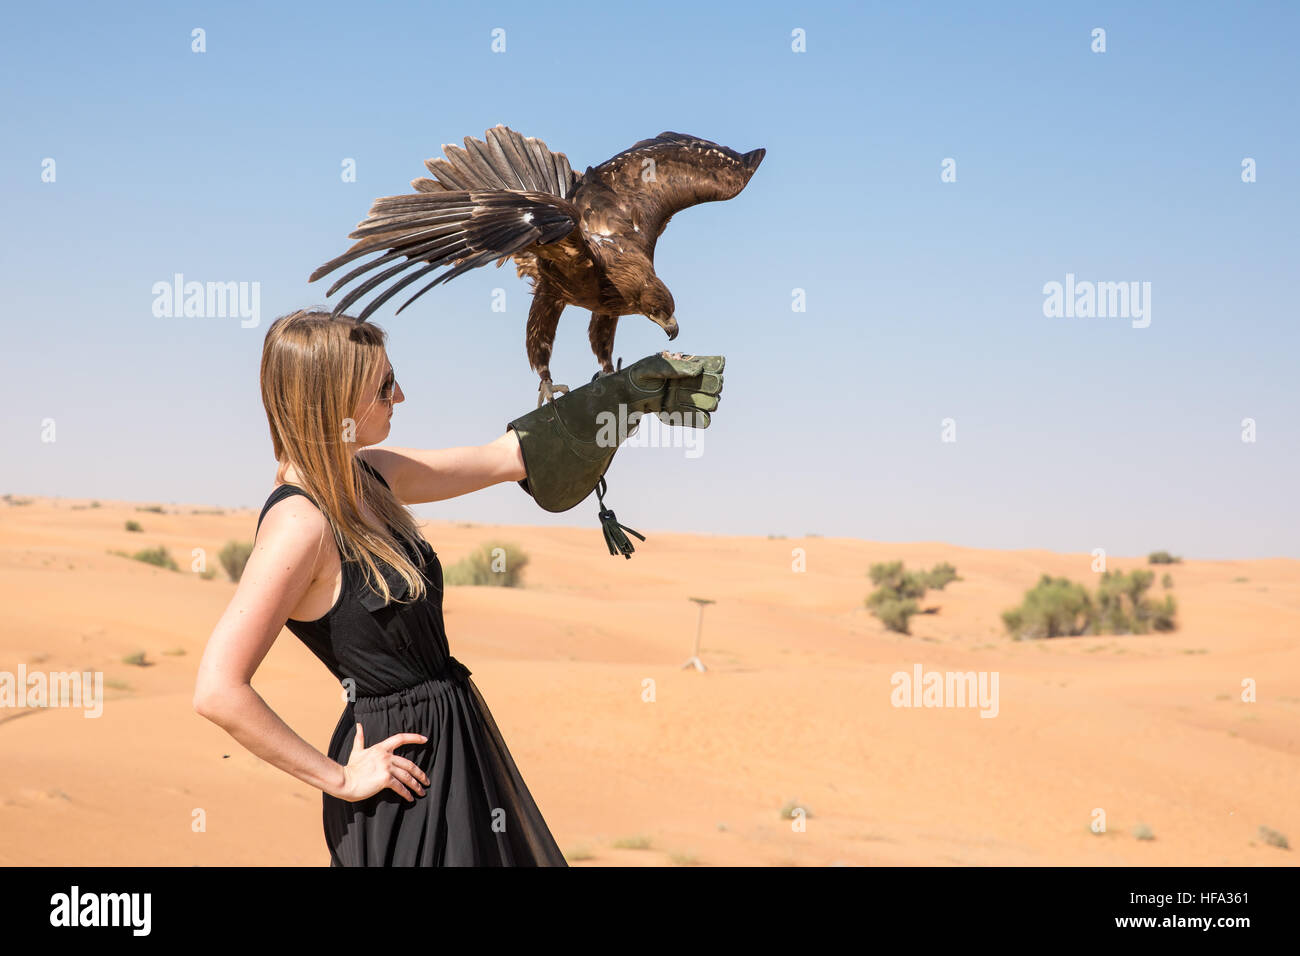 Greater spotted eagle (Clanga clanga) during a desert falconry show in Dubai, UAE. Stock Photo